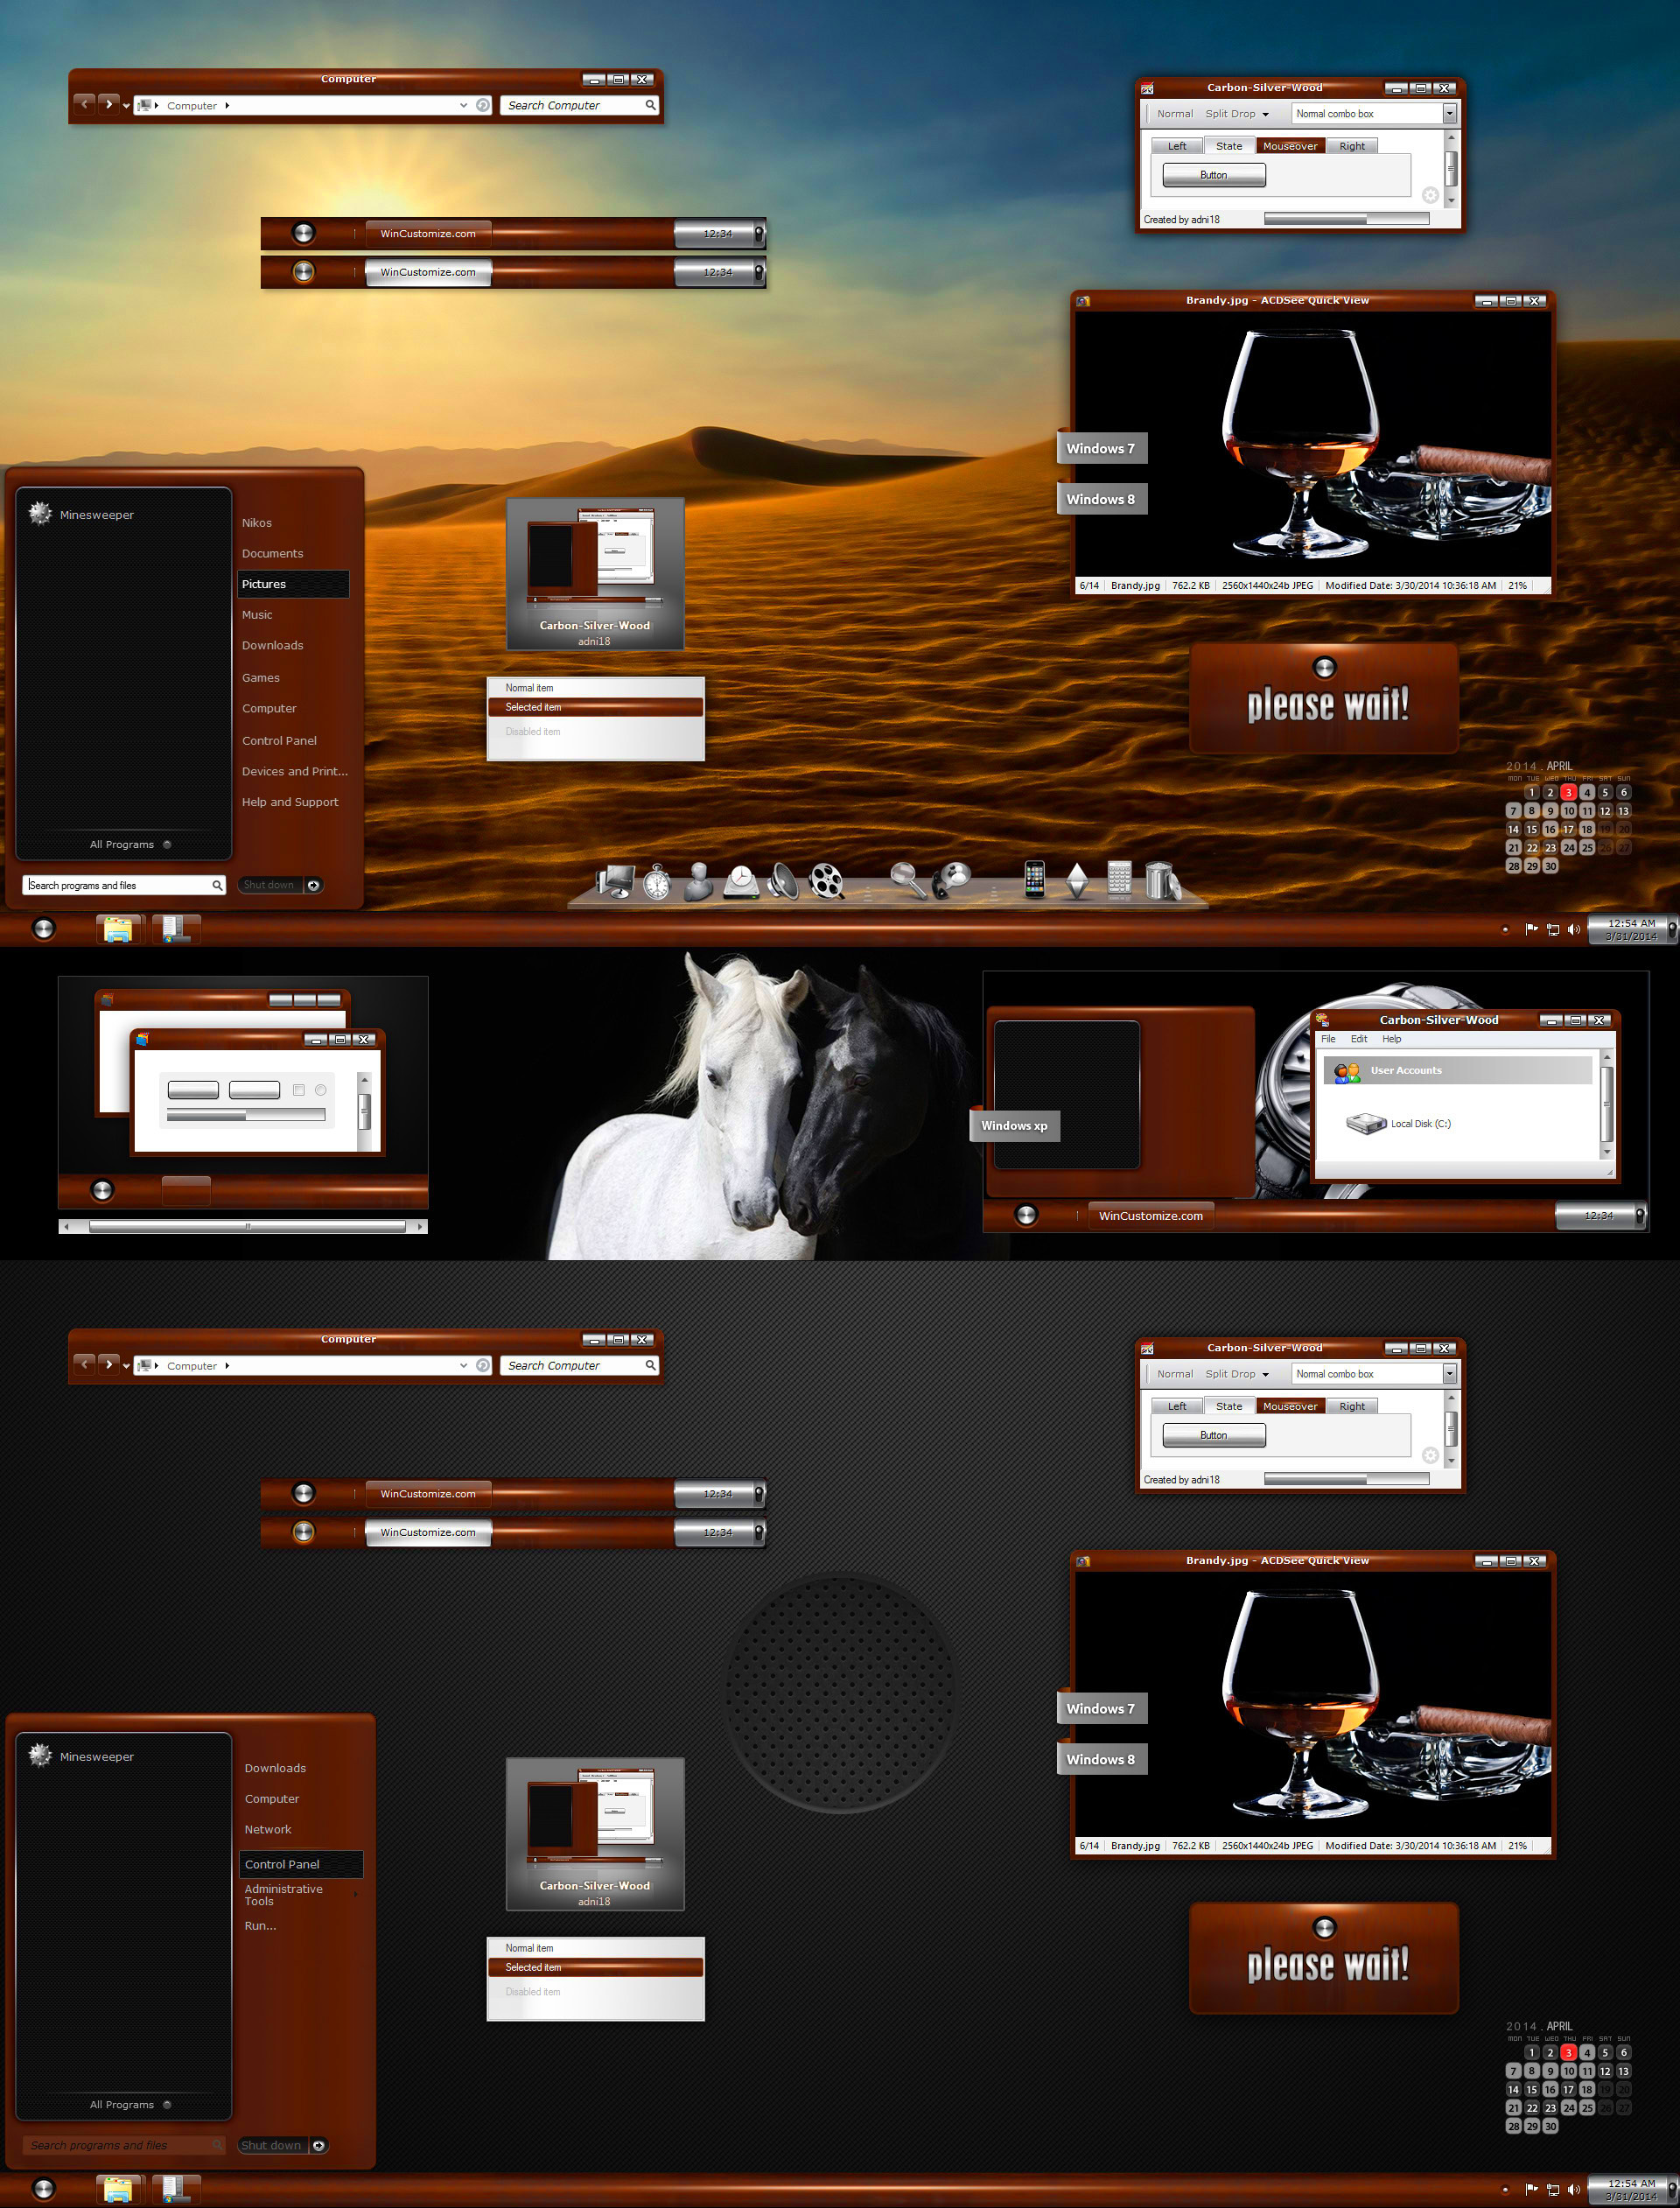 windowblinds theme collection